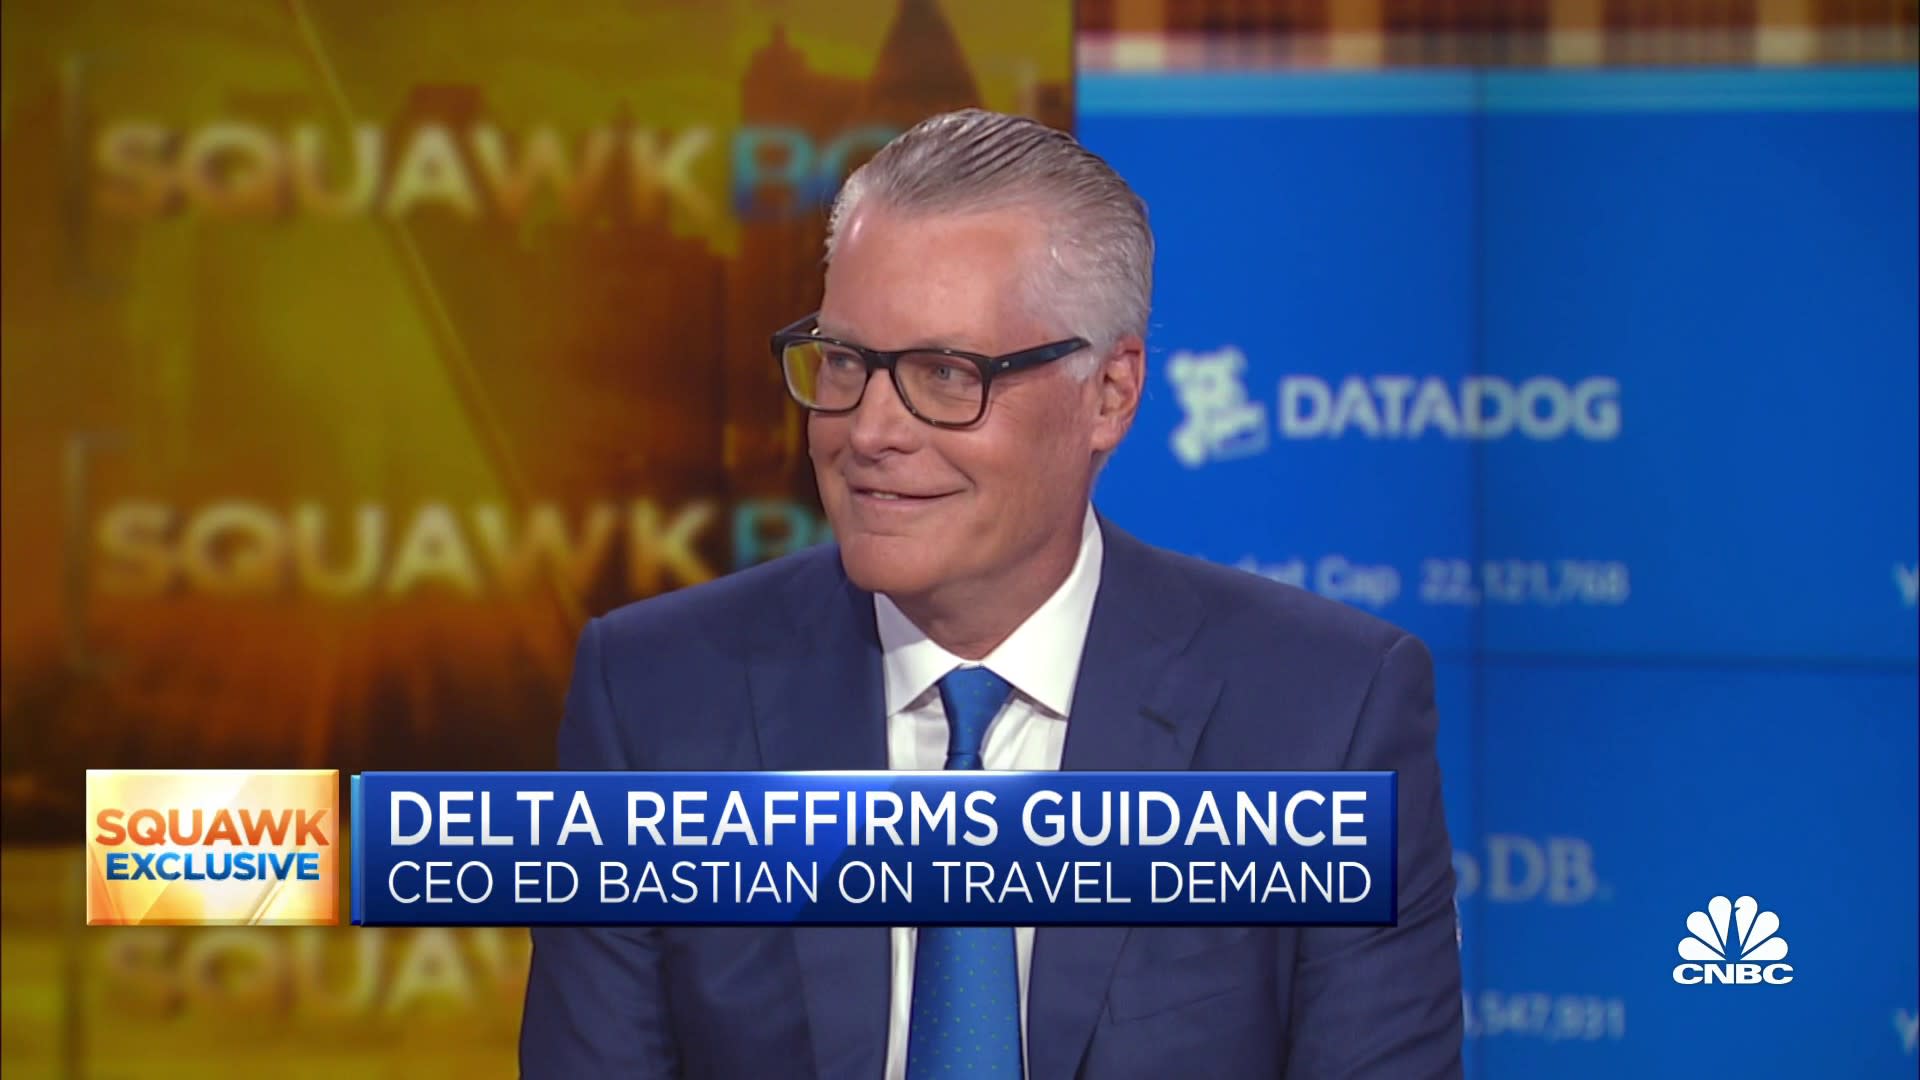 Delta CEO: The 10 highest gross sales times in our history took place in the final 30 days